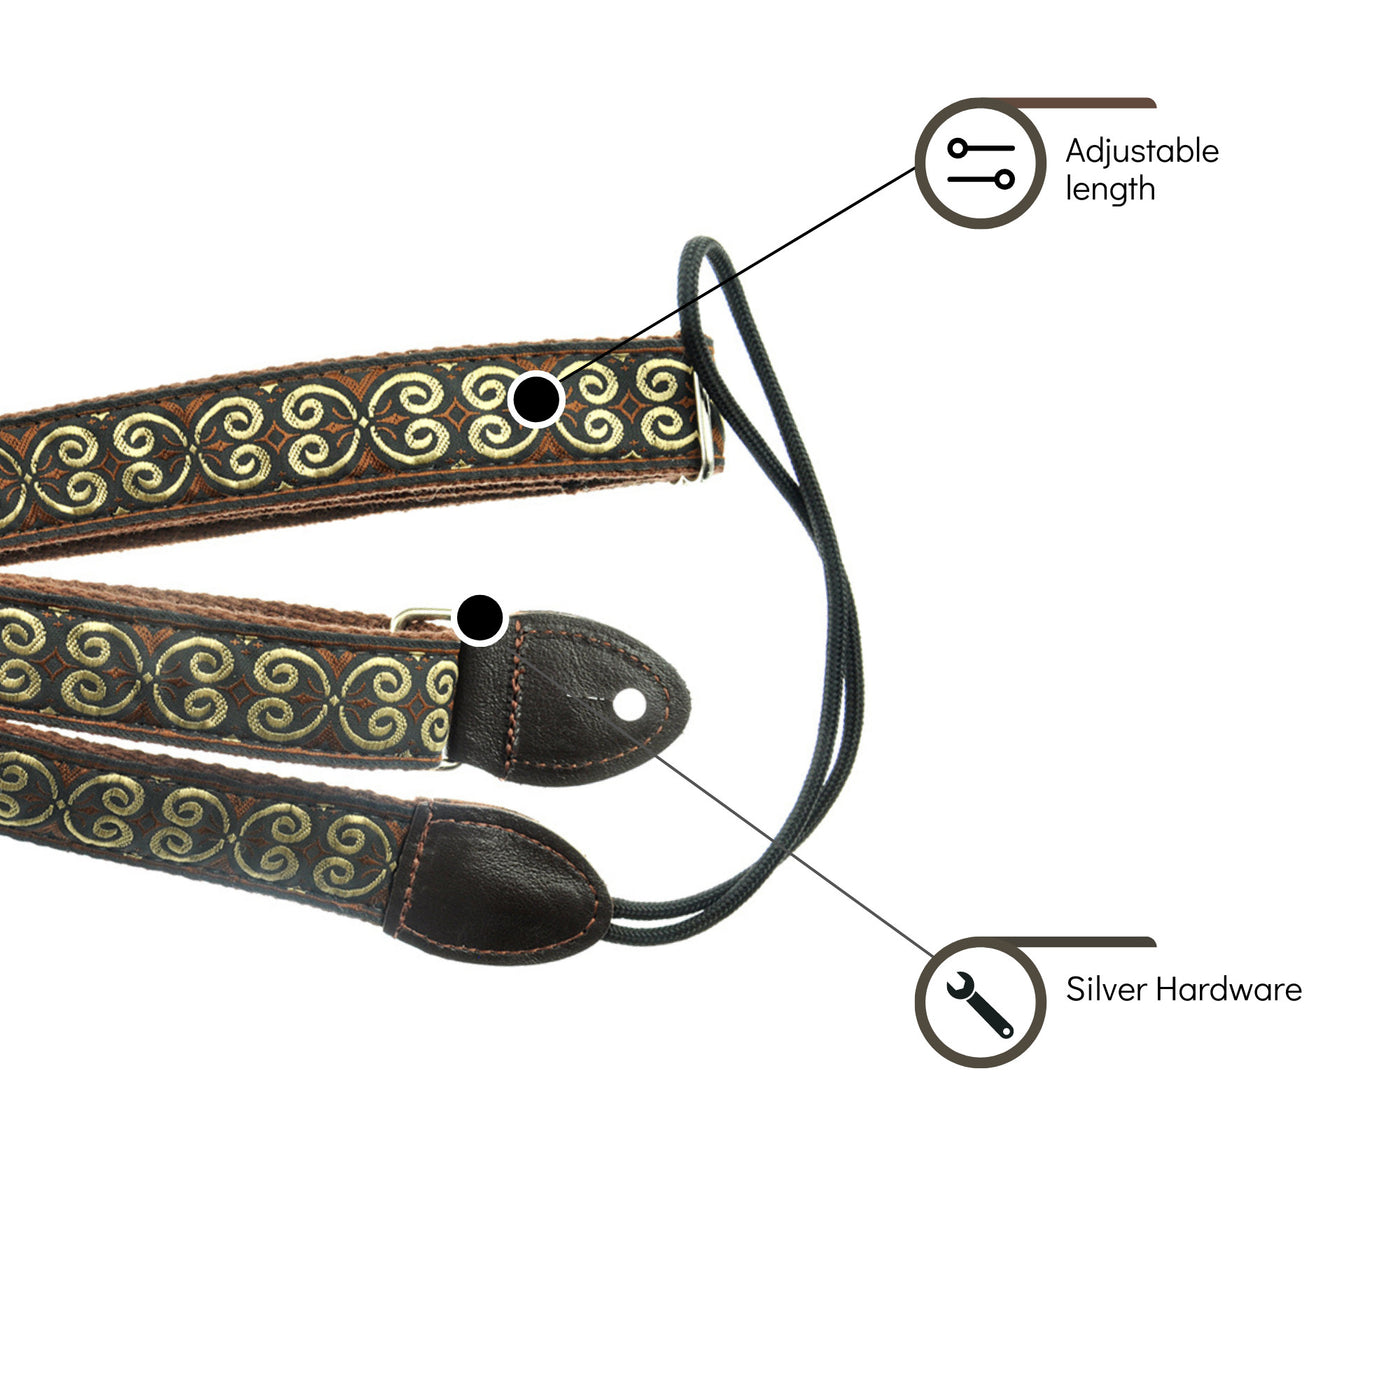 Souldier FMDA0584BR04DB - Handmade Souldier Fabric F-Style Mandolin Straps, 1 Inch Width and Adjustable Length, Brown